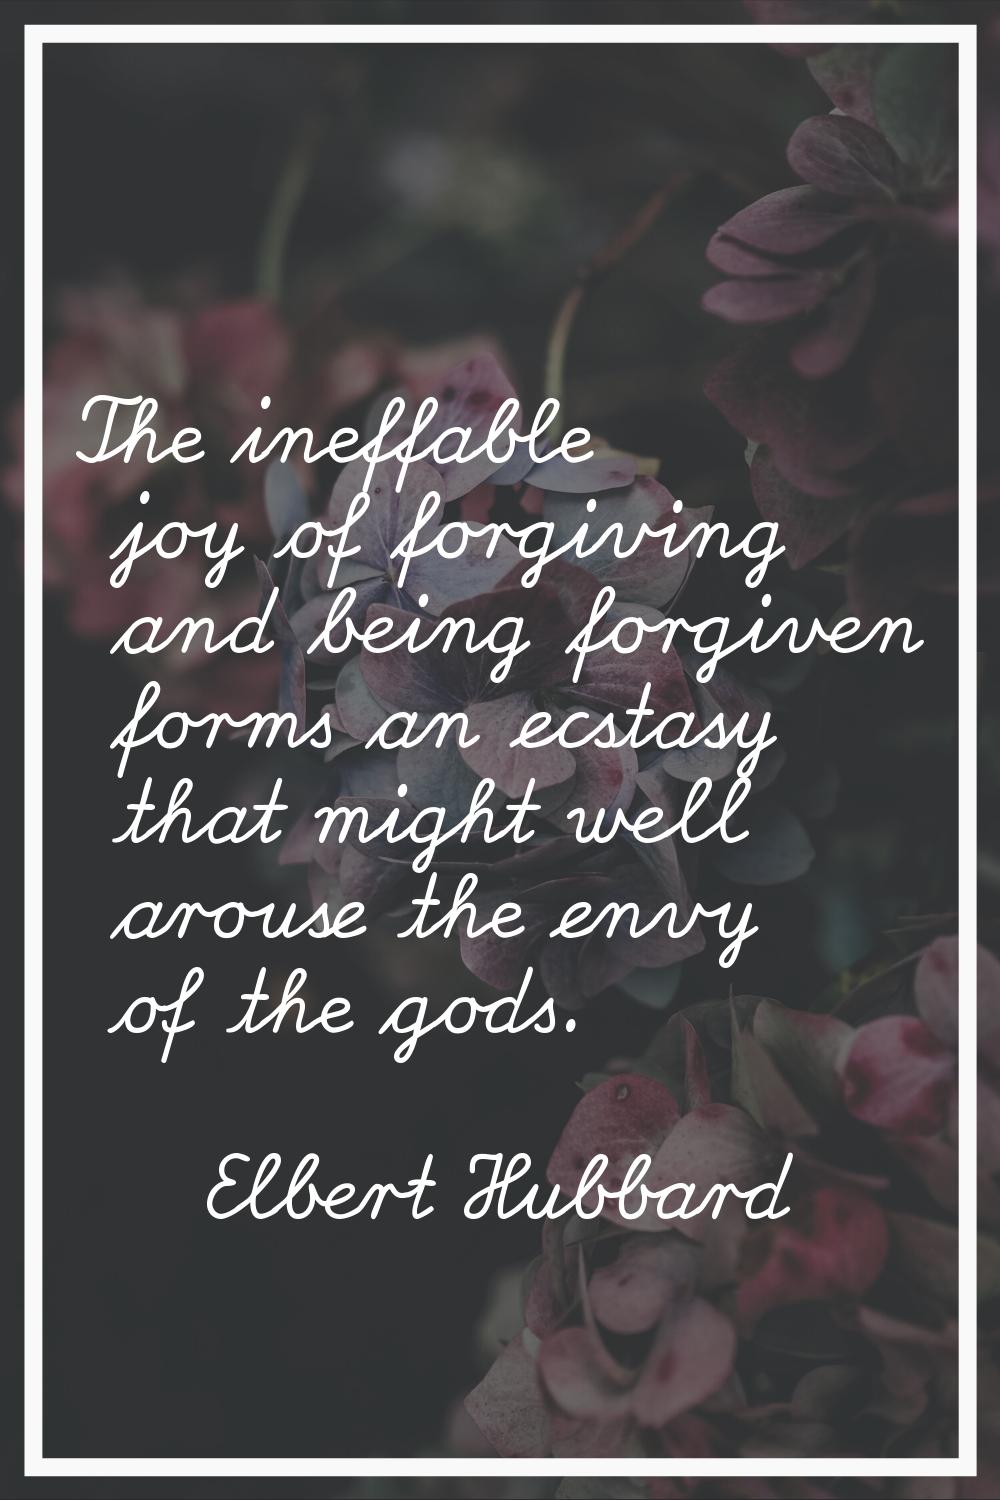 The ineffable joy of forgiving and being forgiven forms an ecstasy that might well arouse the envy 